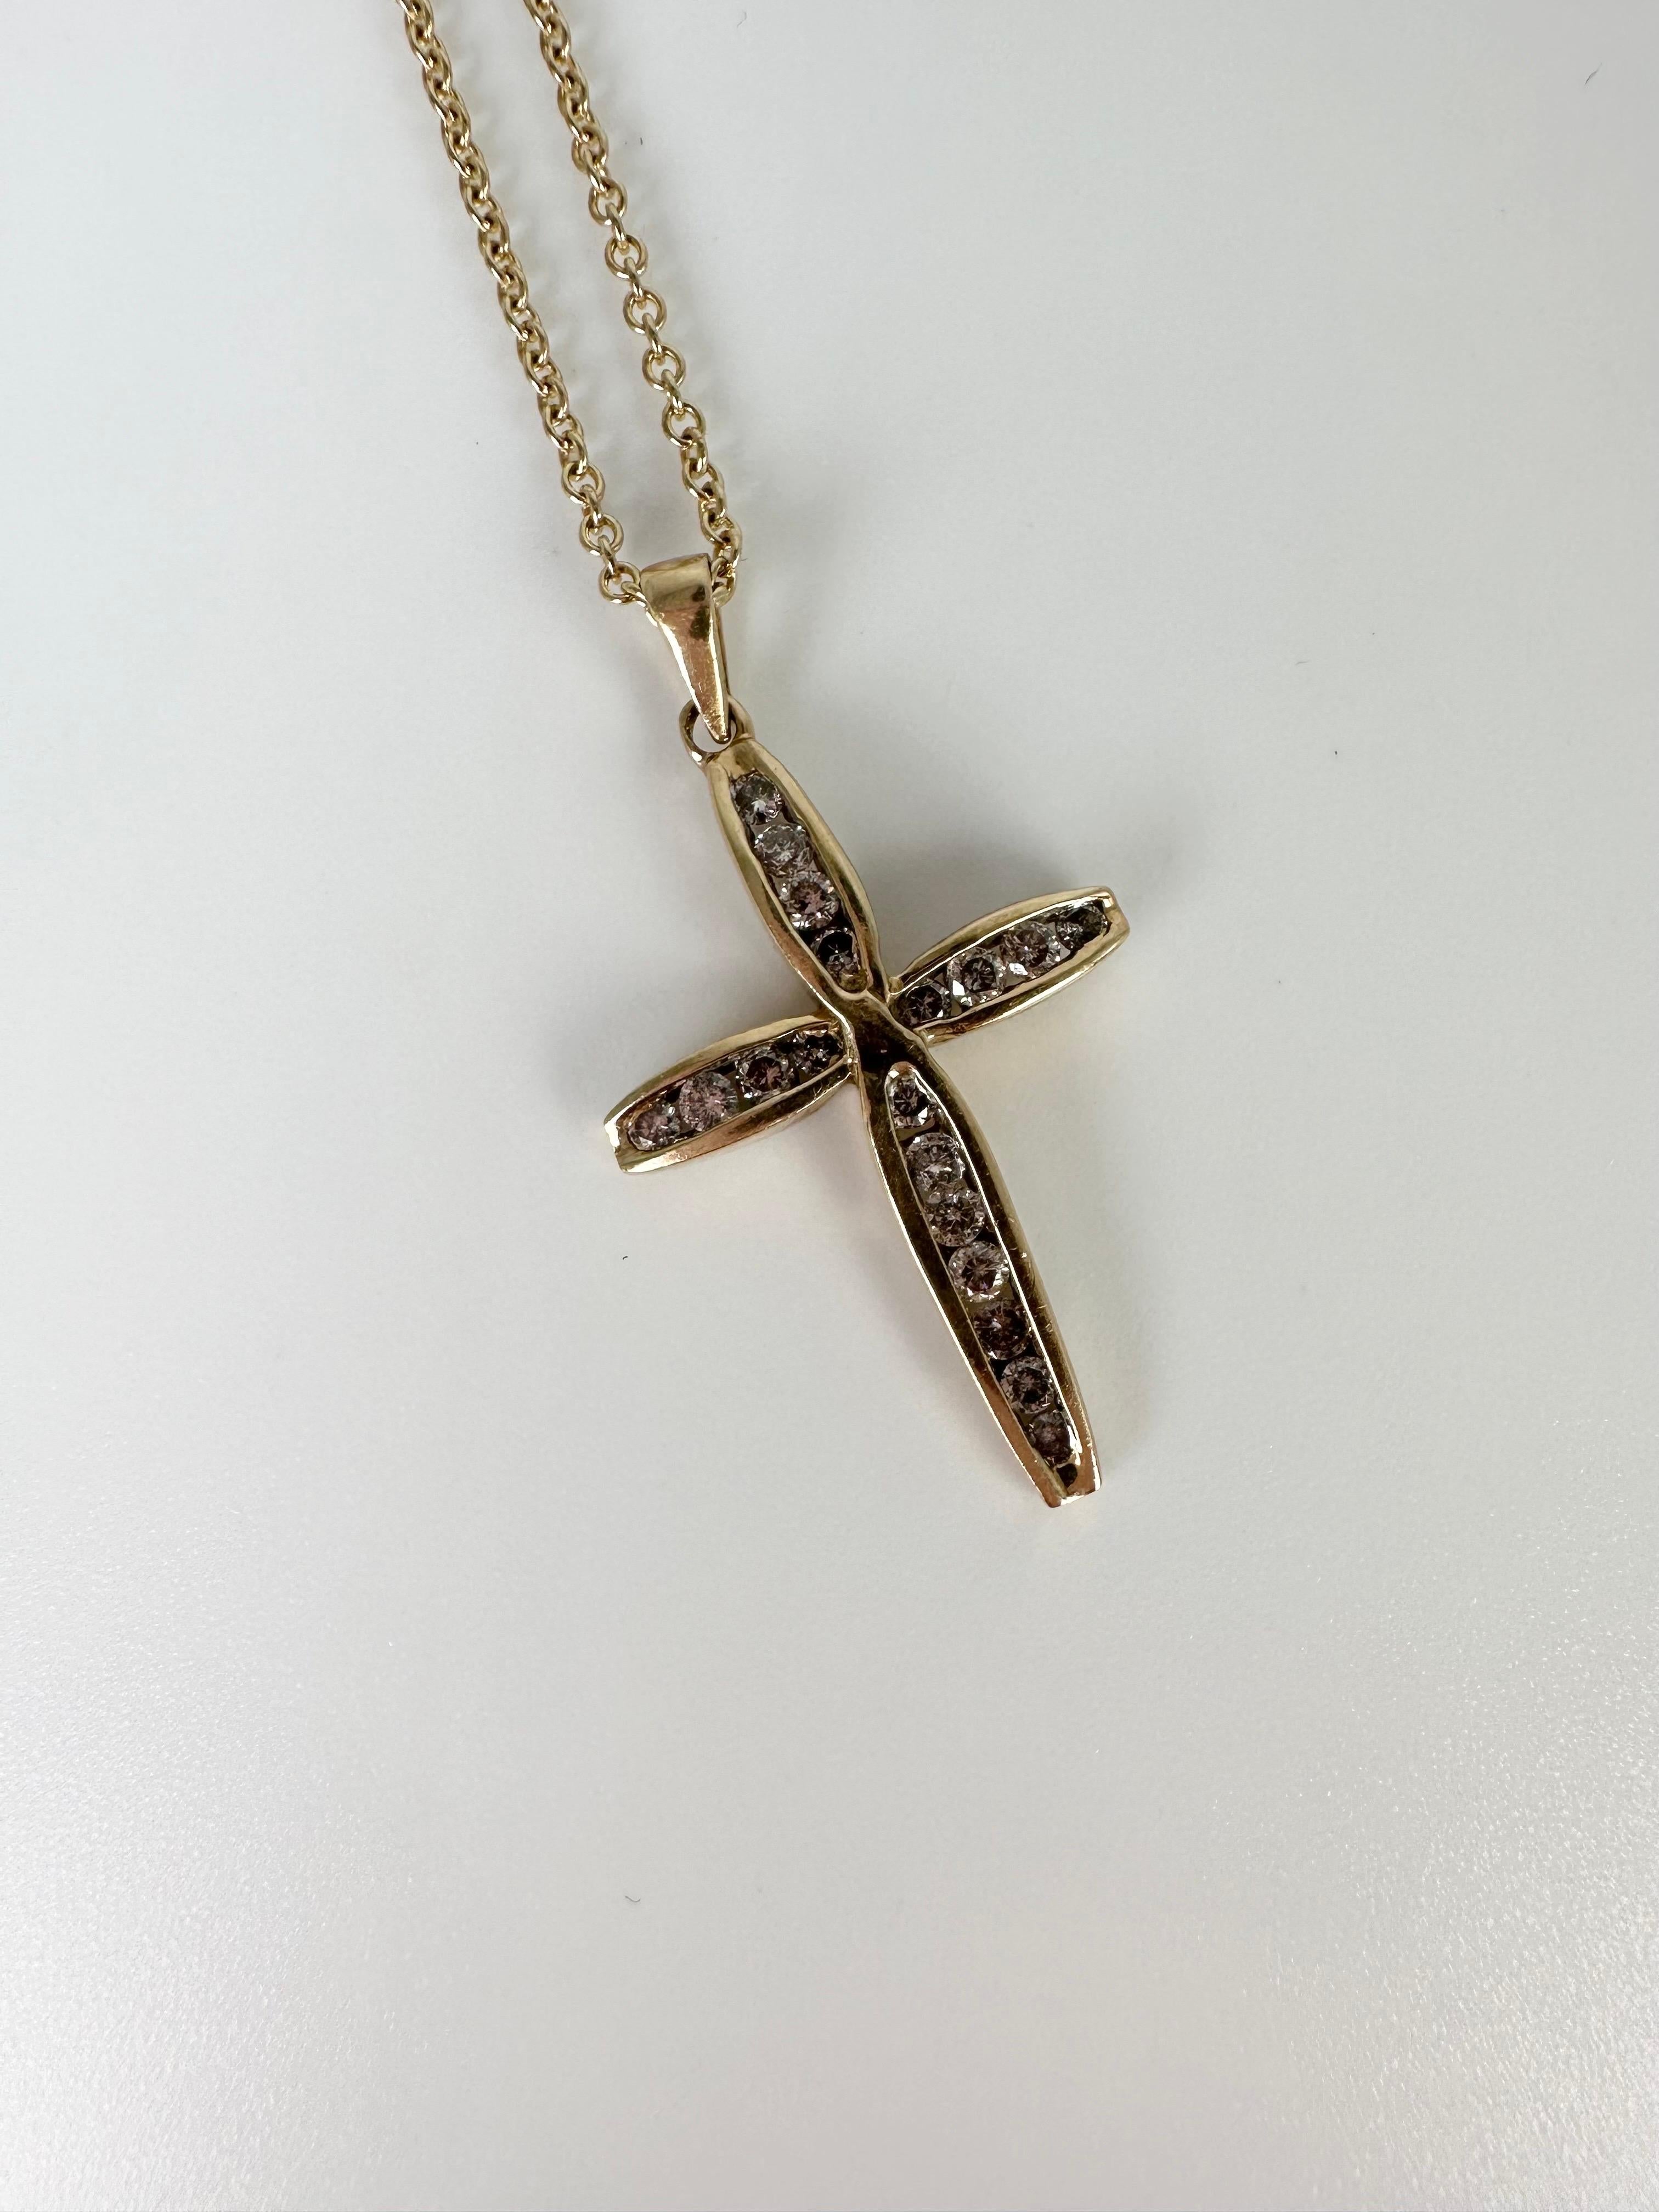 Simple channel set diamond cross in 10KT yellow gold, vry minimalistic with the right amount of sparkle. 
GOLD: 10KT gold
NATURAL DIAMOND(S)
Clarity/Color: SI/G
Carat:0.25ct
Grams:2.13
160-88PI
Chain: 18